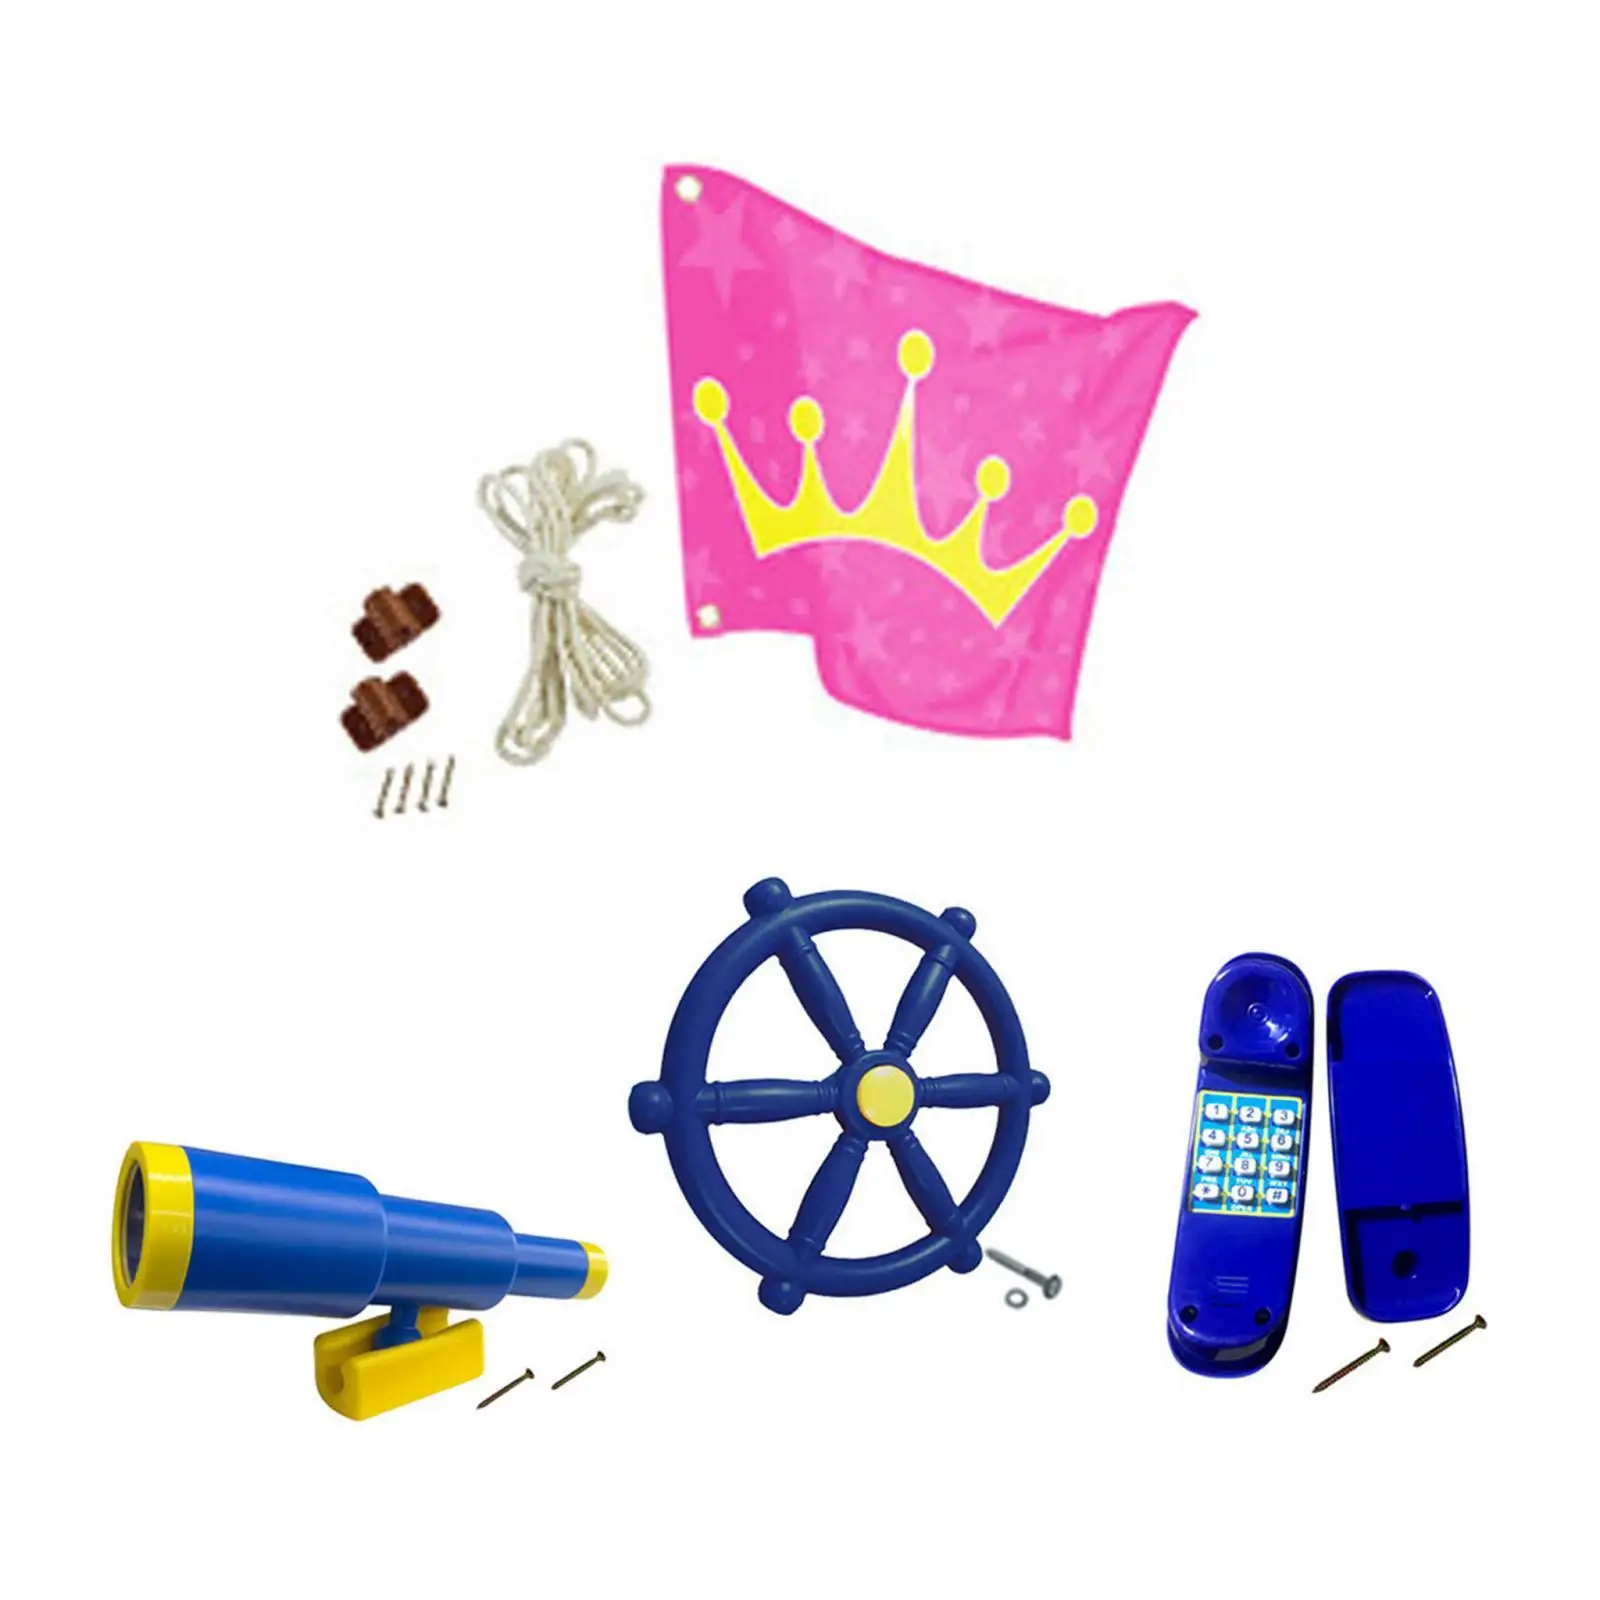 Playground Accessories Easy to Install Swing Playground Accessories for Backyard Swingset Tree House Holiday Gifts